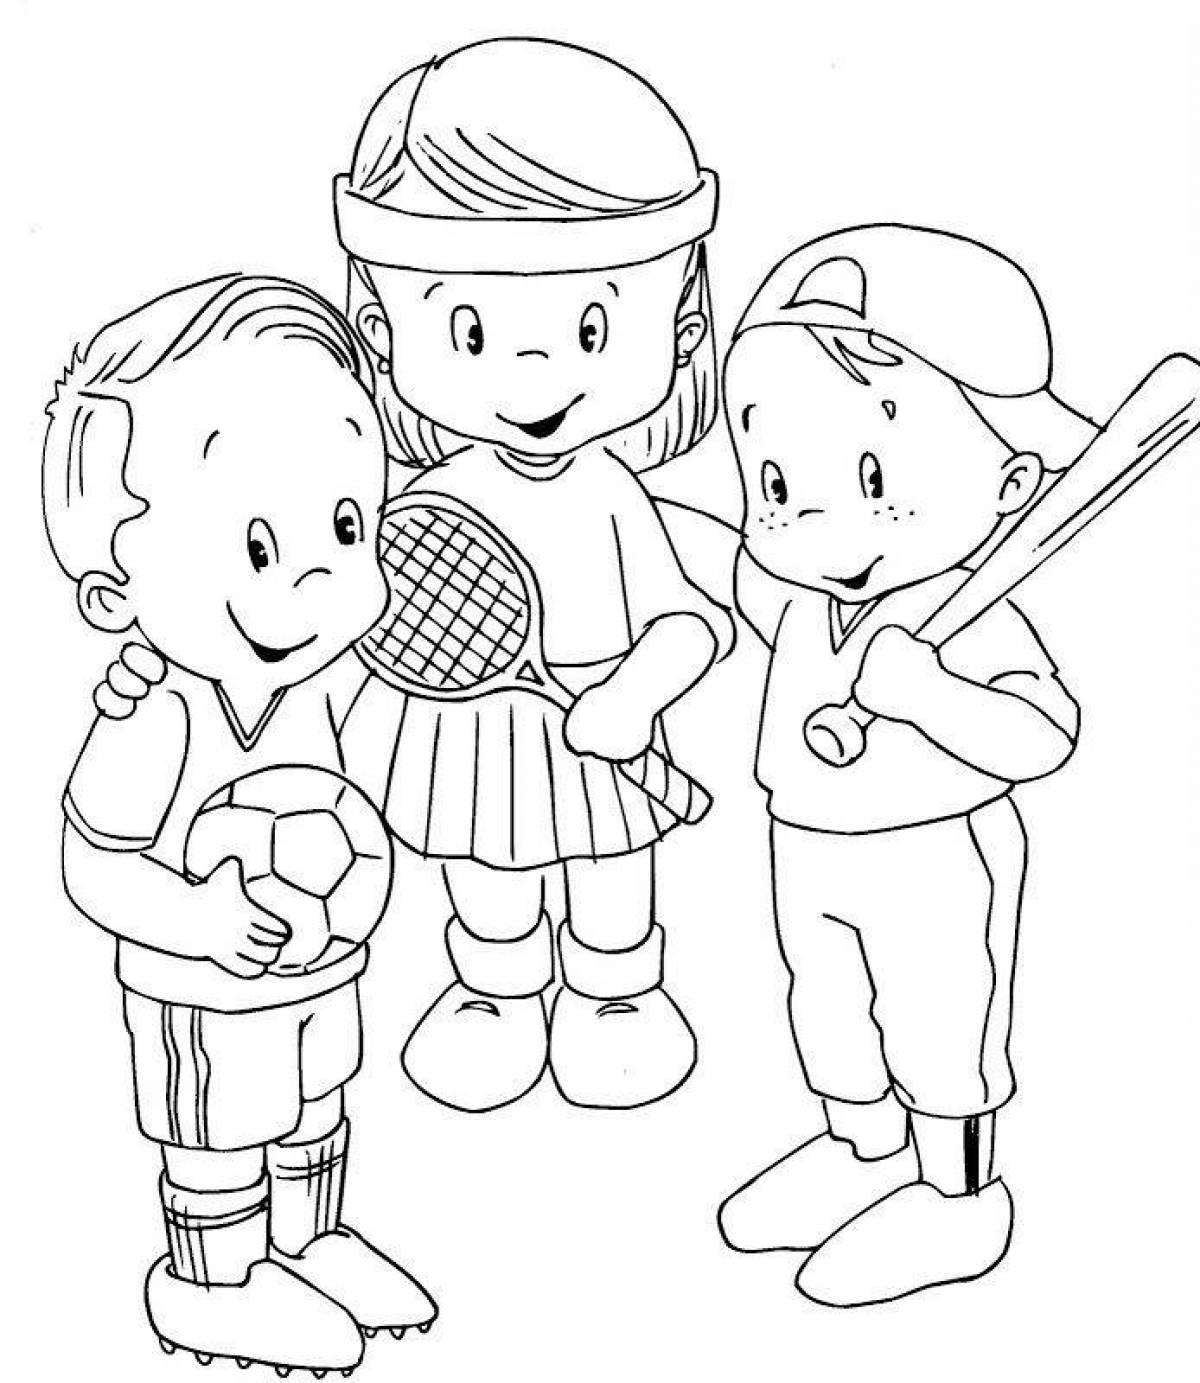 Playful friends coloring page